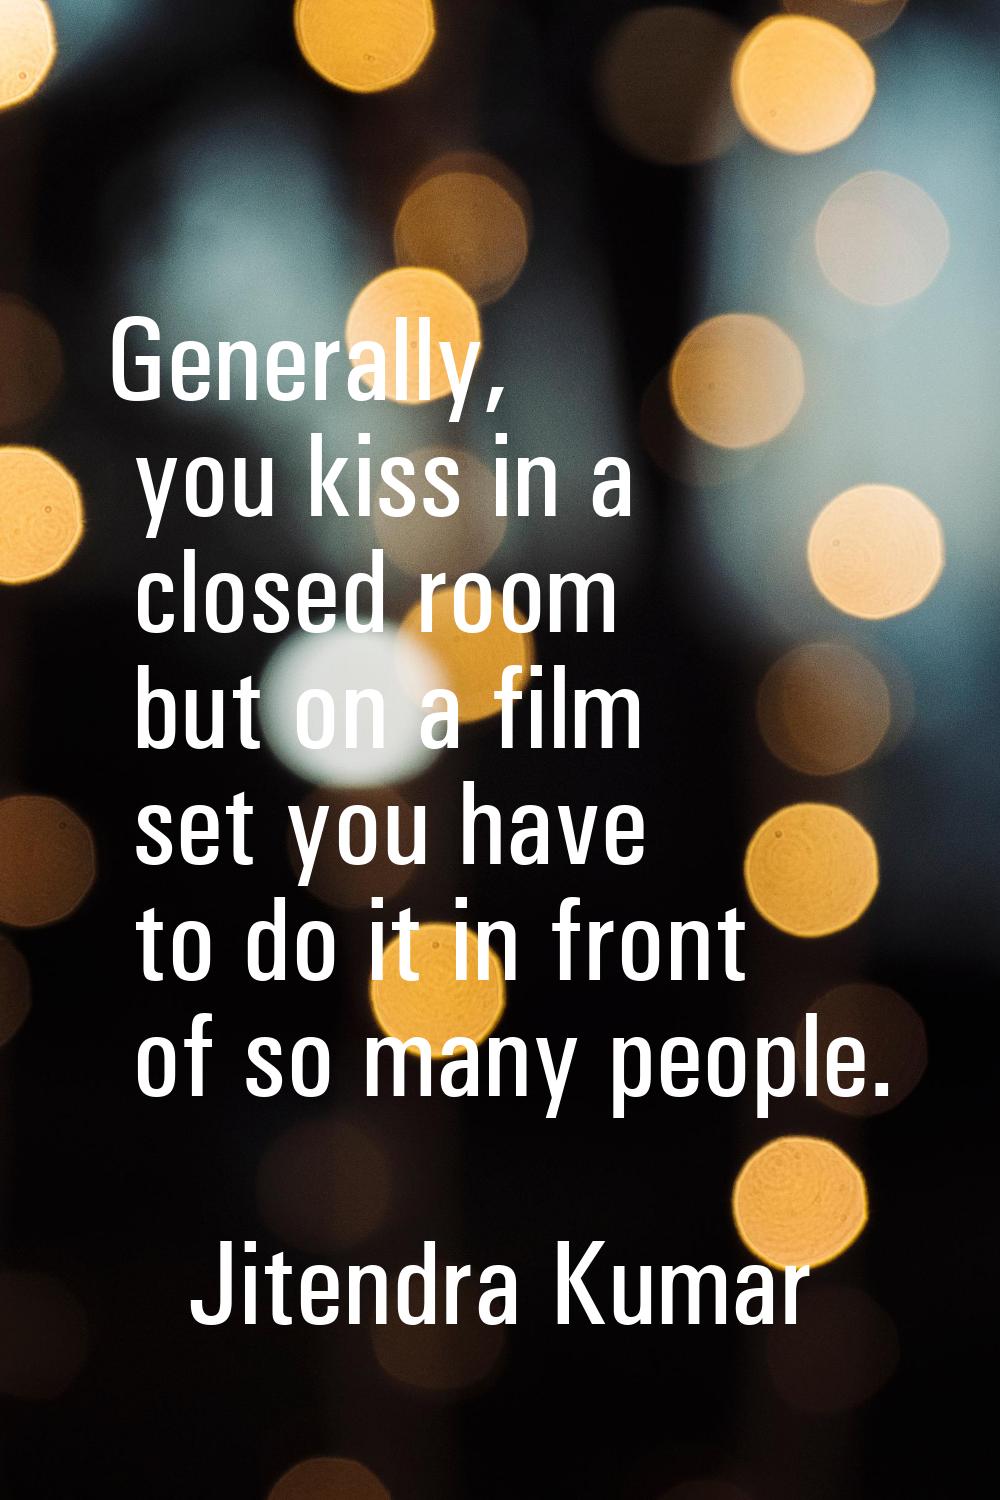 Generally, you kiss in a closed room but on a film set you have to do it in front of so many people